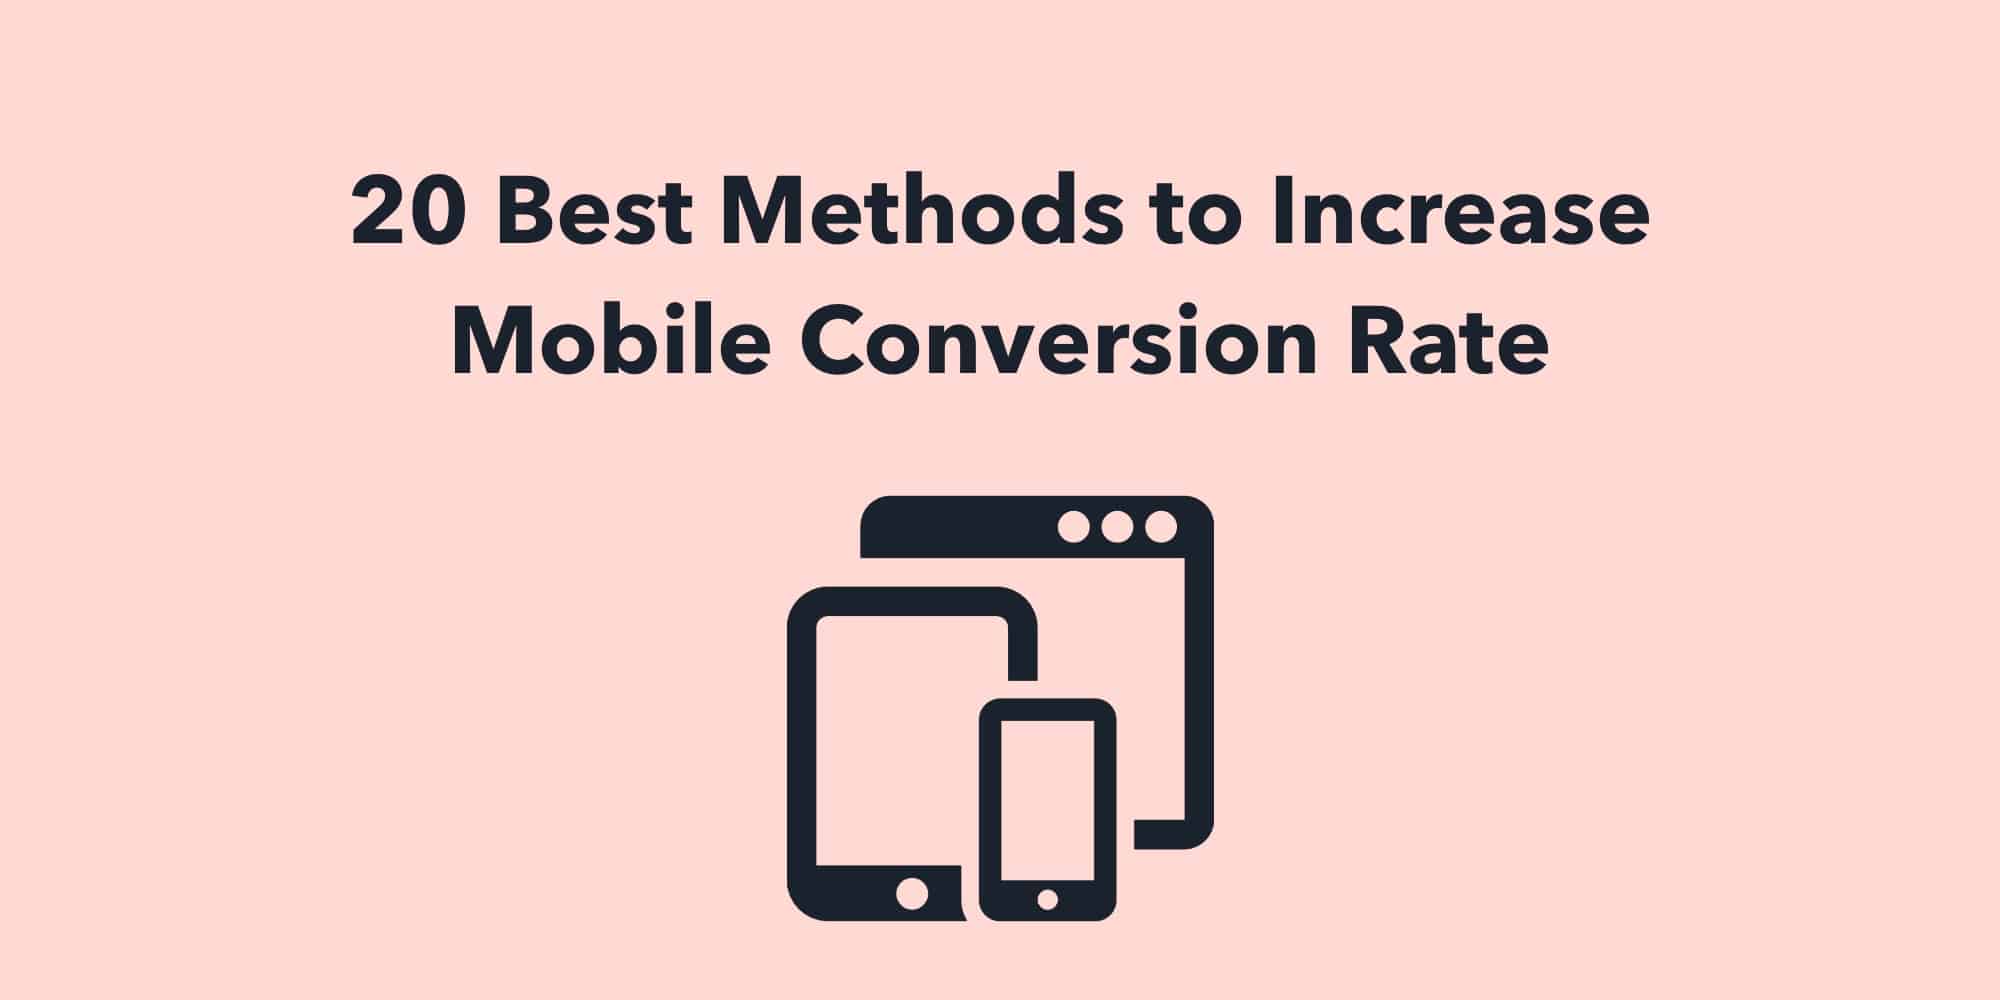 20 Best Methods to Increase Mobile Conversion Rate